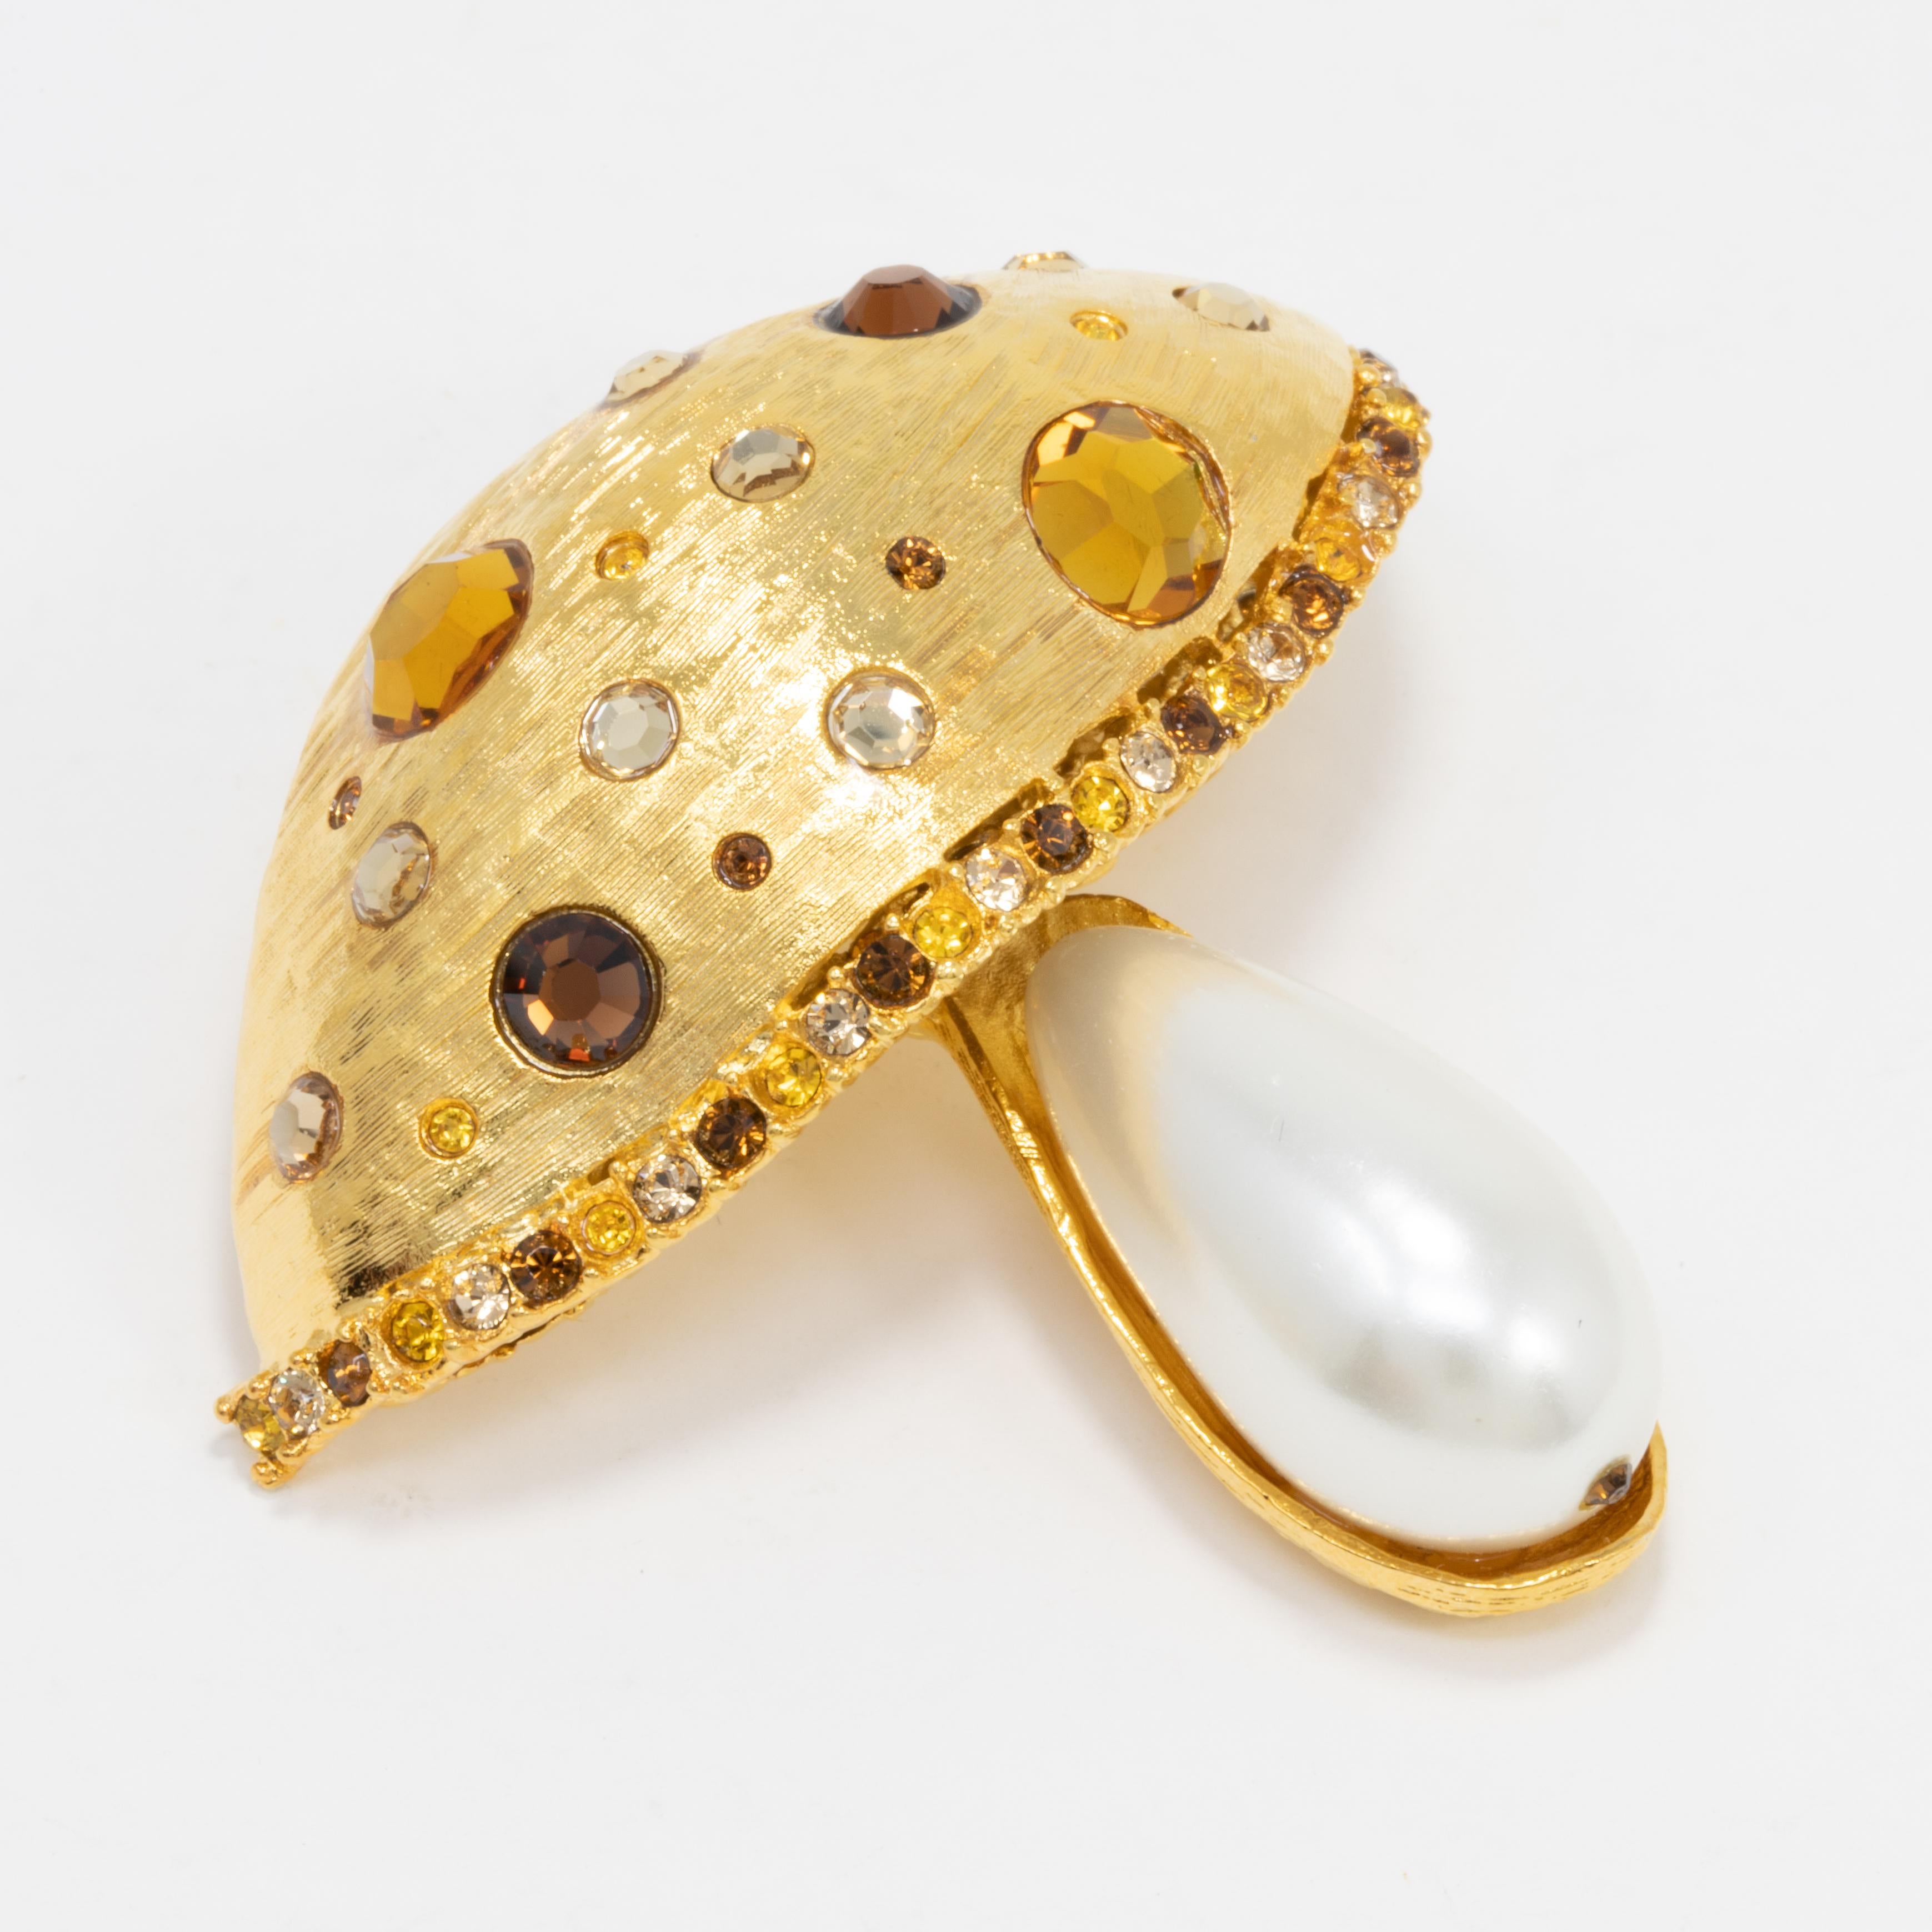 A whimsical golden pin by Kenneth Jay Lane! This glamorous mushroom is decorated with crystals and a single faux pearl.

Marks / hallmarks / etc: Kenneth Lane, Made in USA